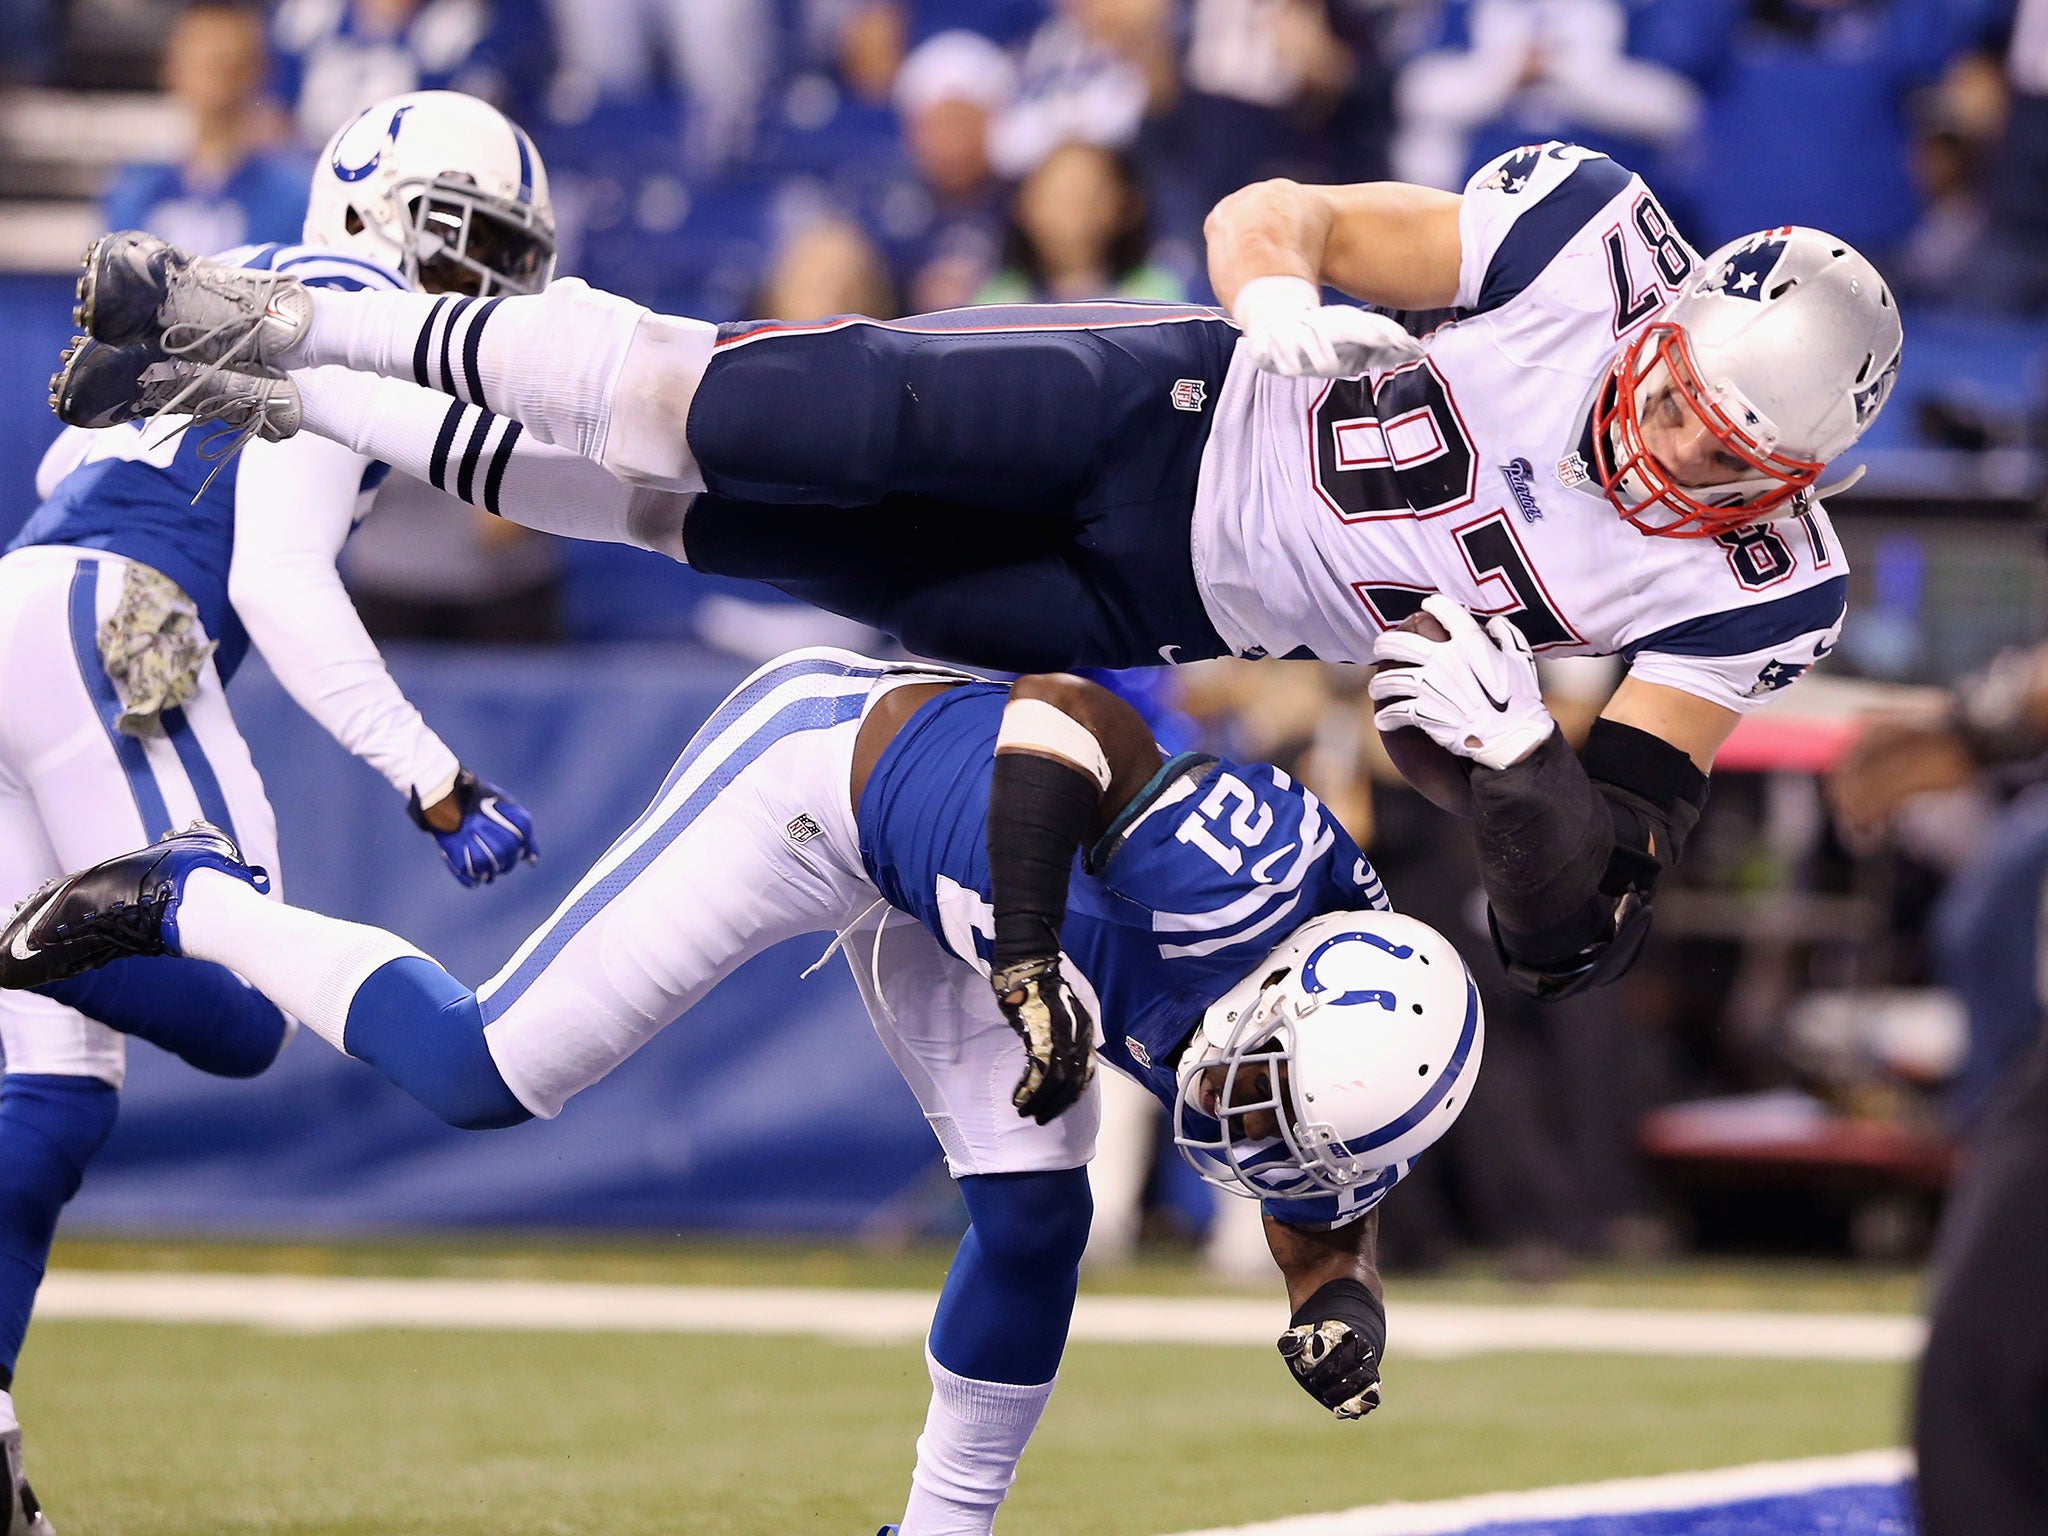 Rob Gronkowski scored the final touchdown in the victory over the Detroit Lions